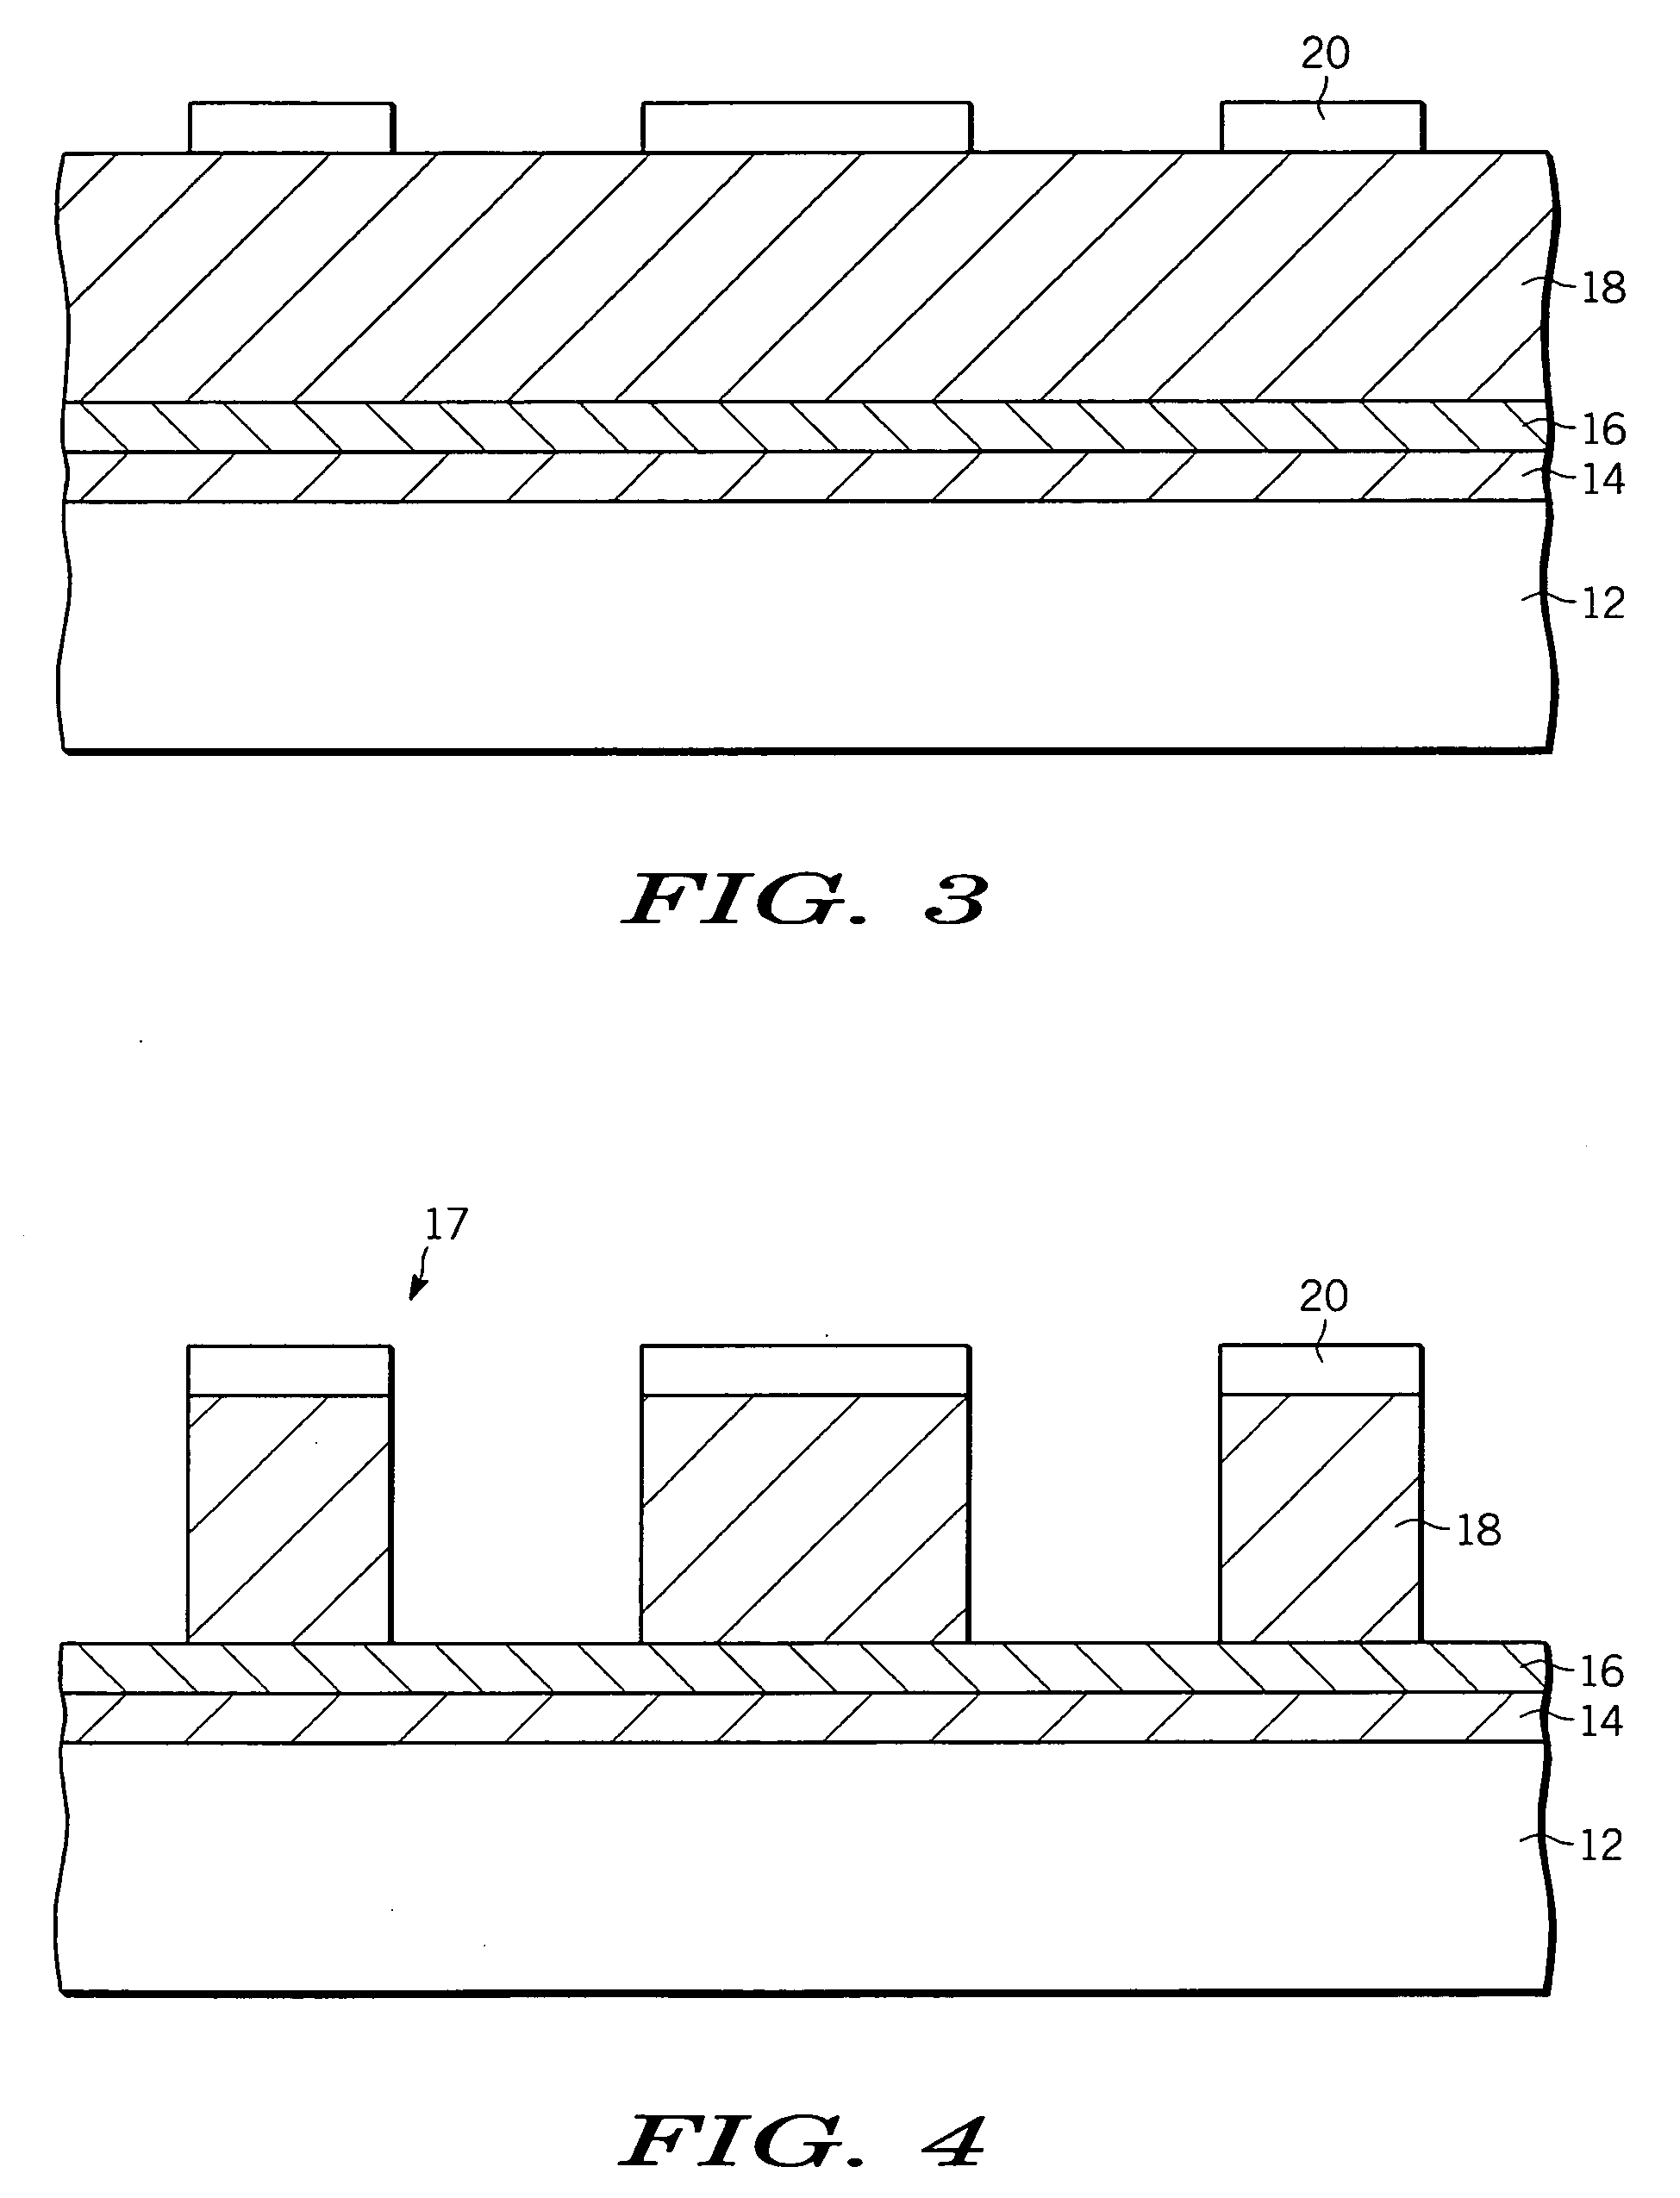 Integrated micro fuel cell apparatus